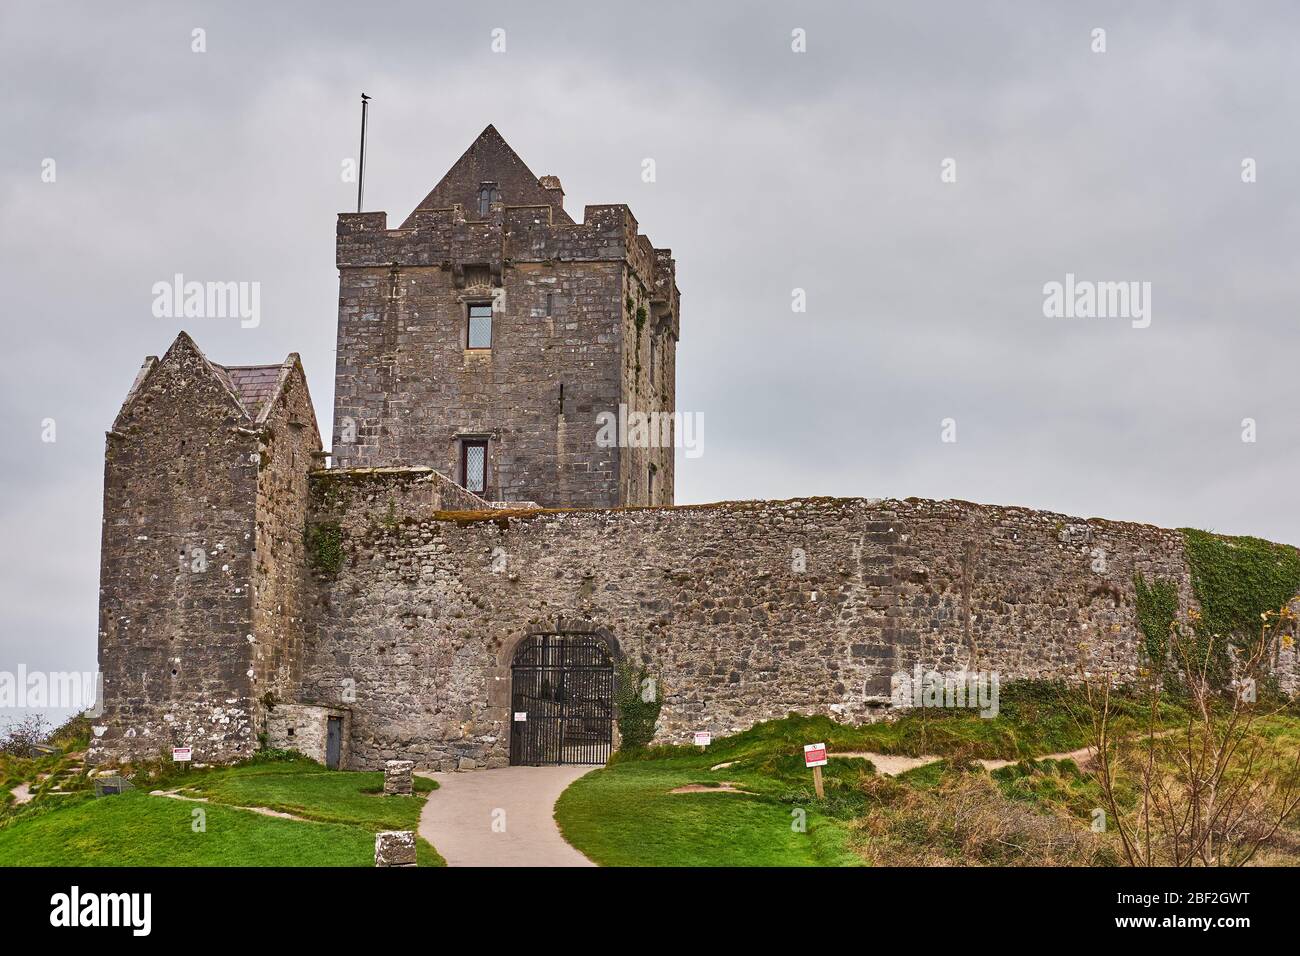 Dunguaire Castle in Kinvara, County Galway, Ireland. Stock Photo